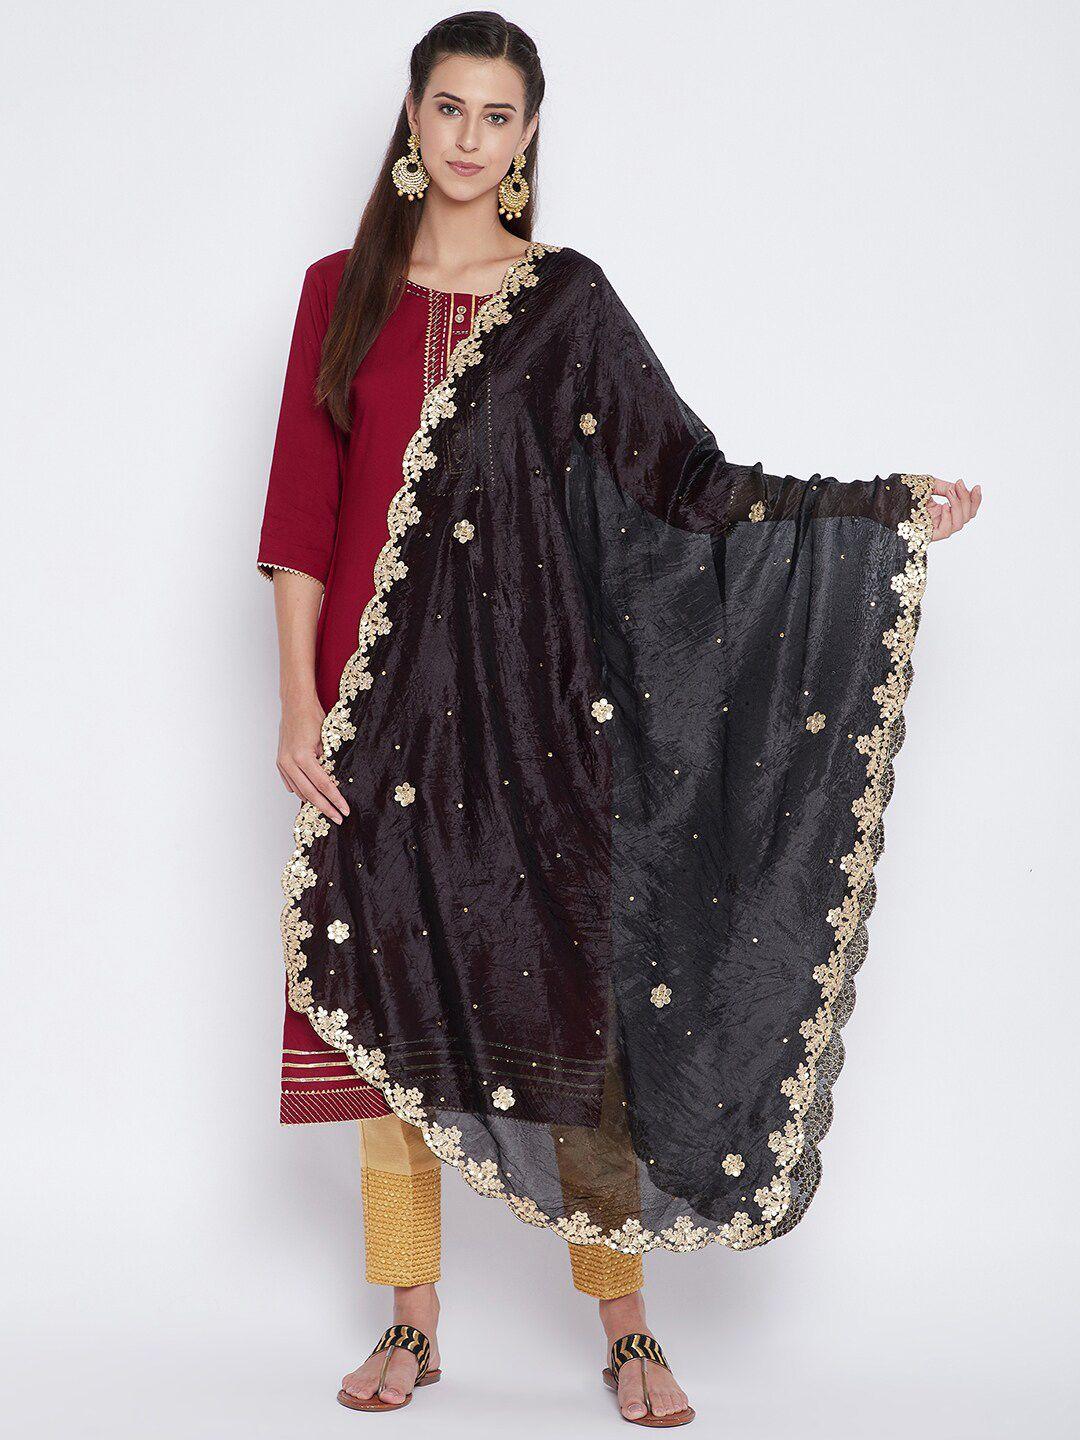 clora-creation-women-black-&-gold-toned-embroidered-dupatta-with-beads-and-stones